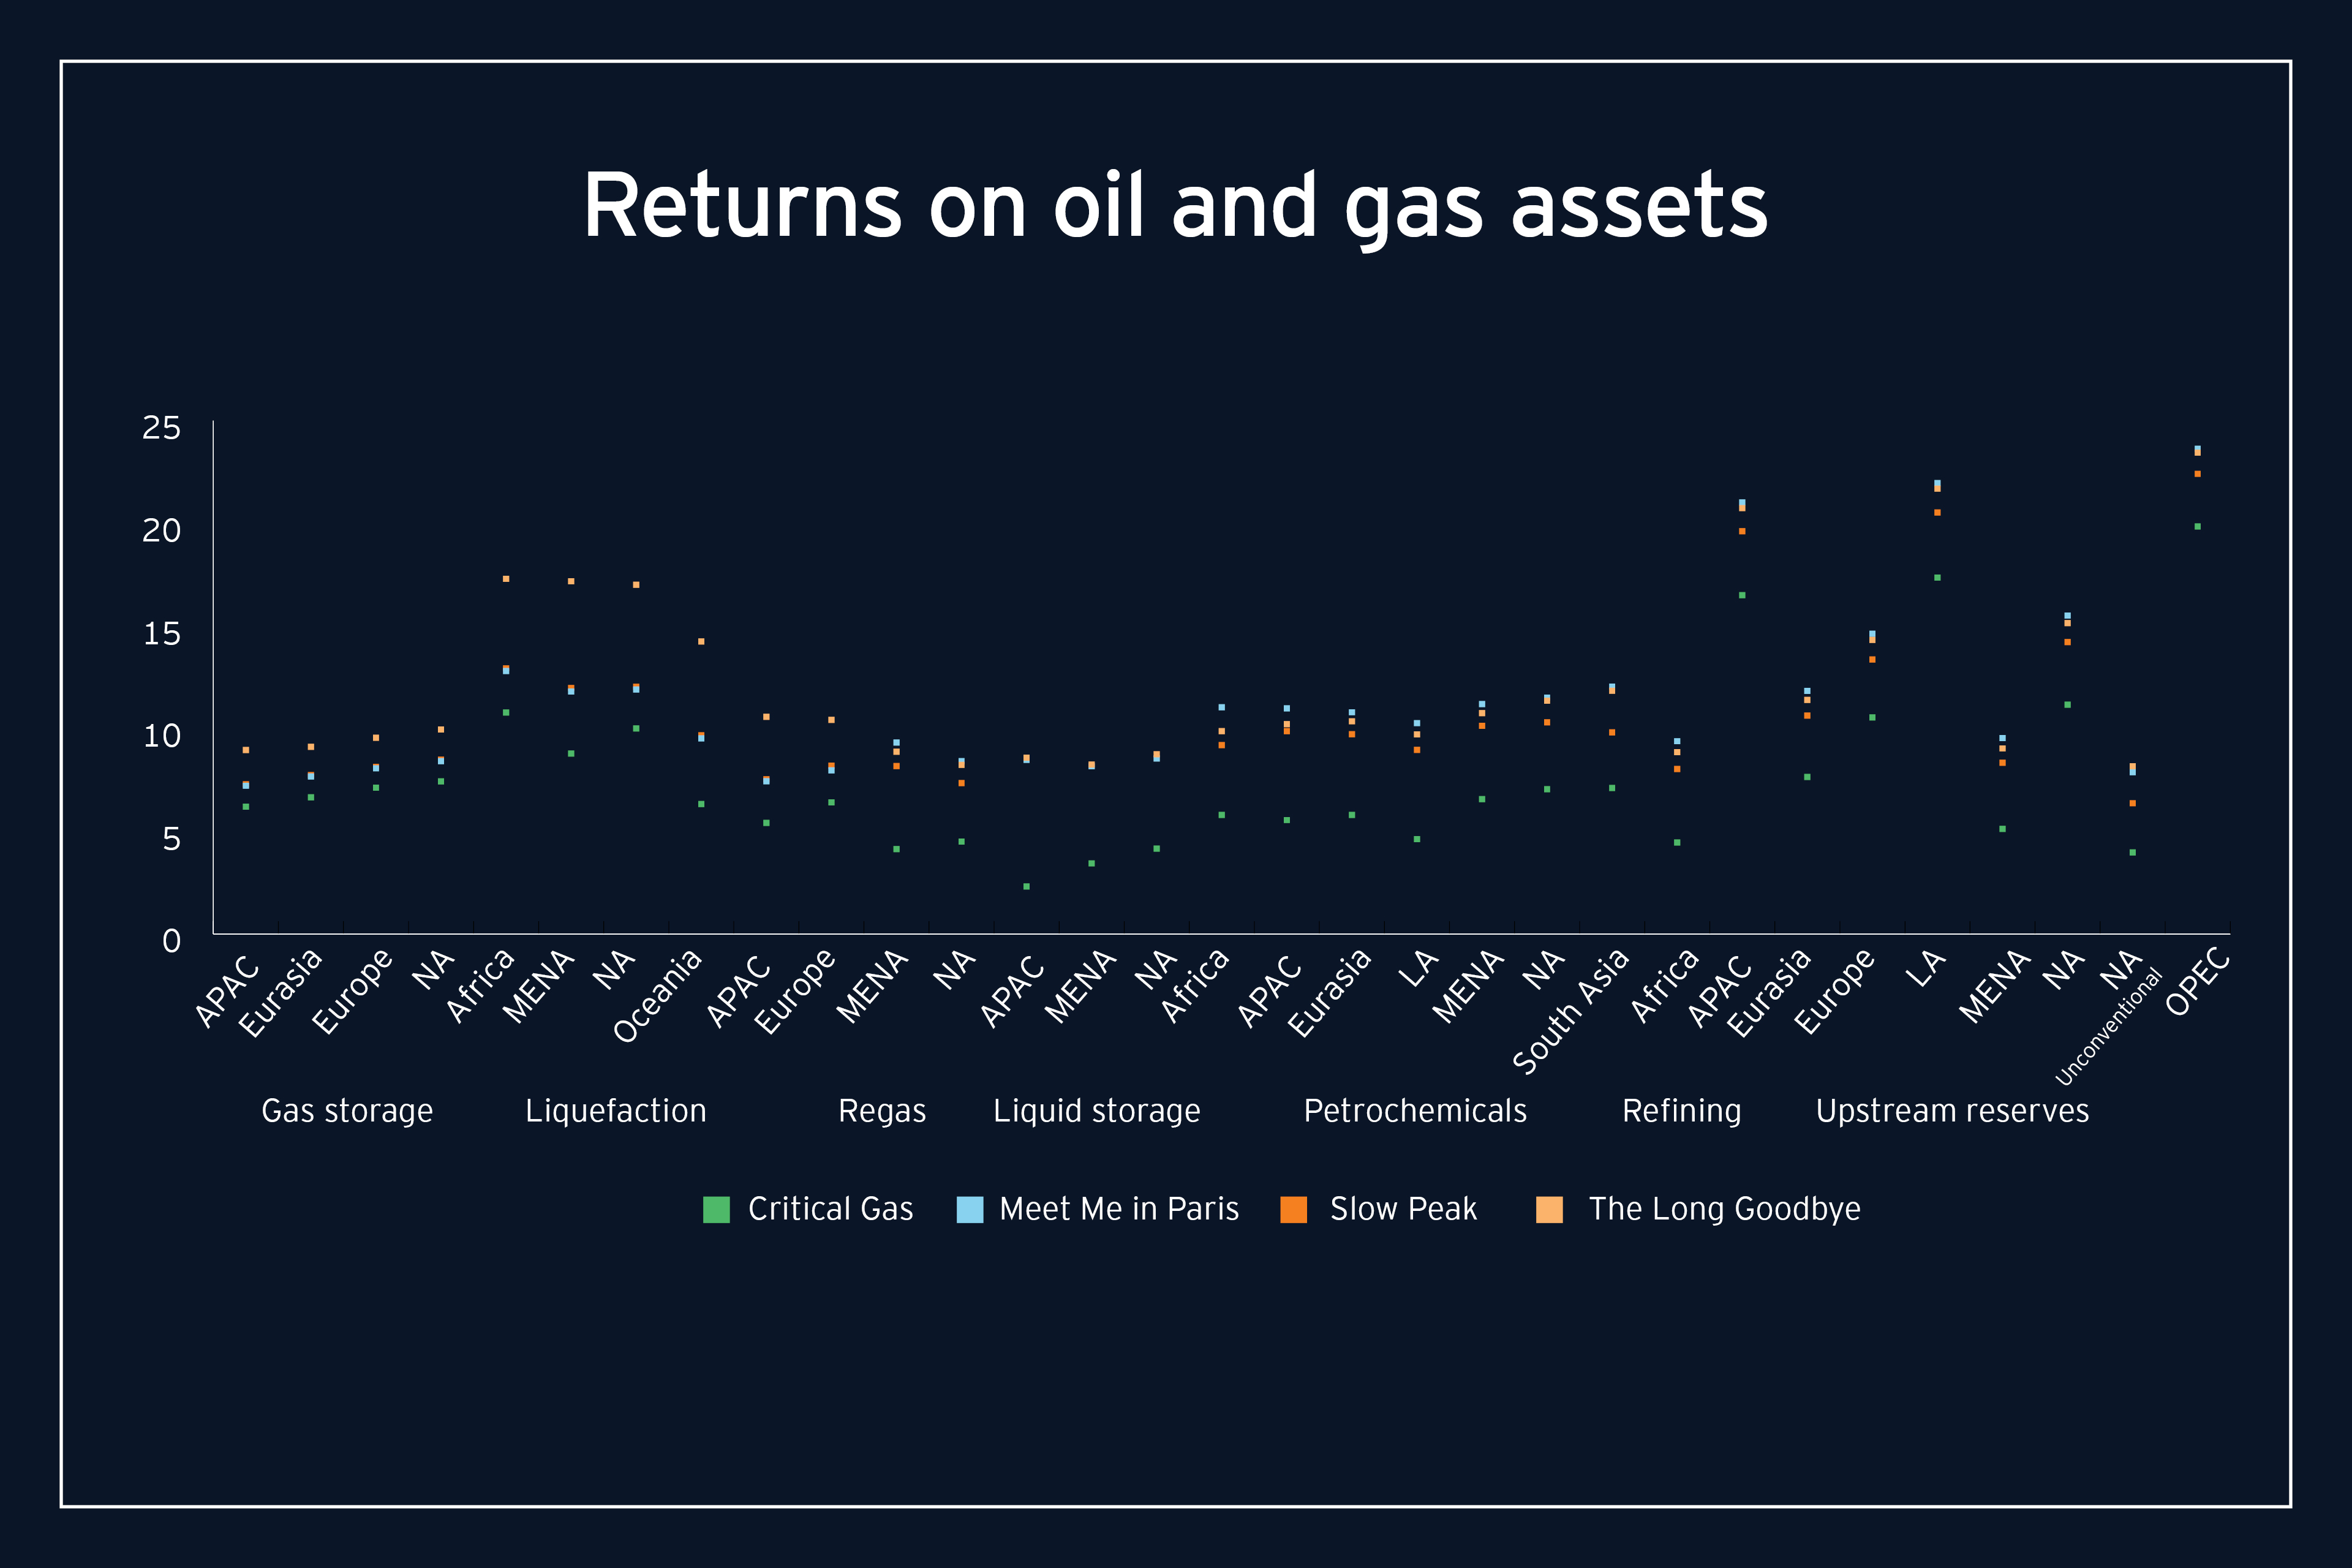 Returns on oil and gas assets